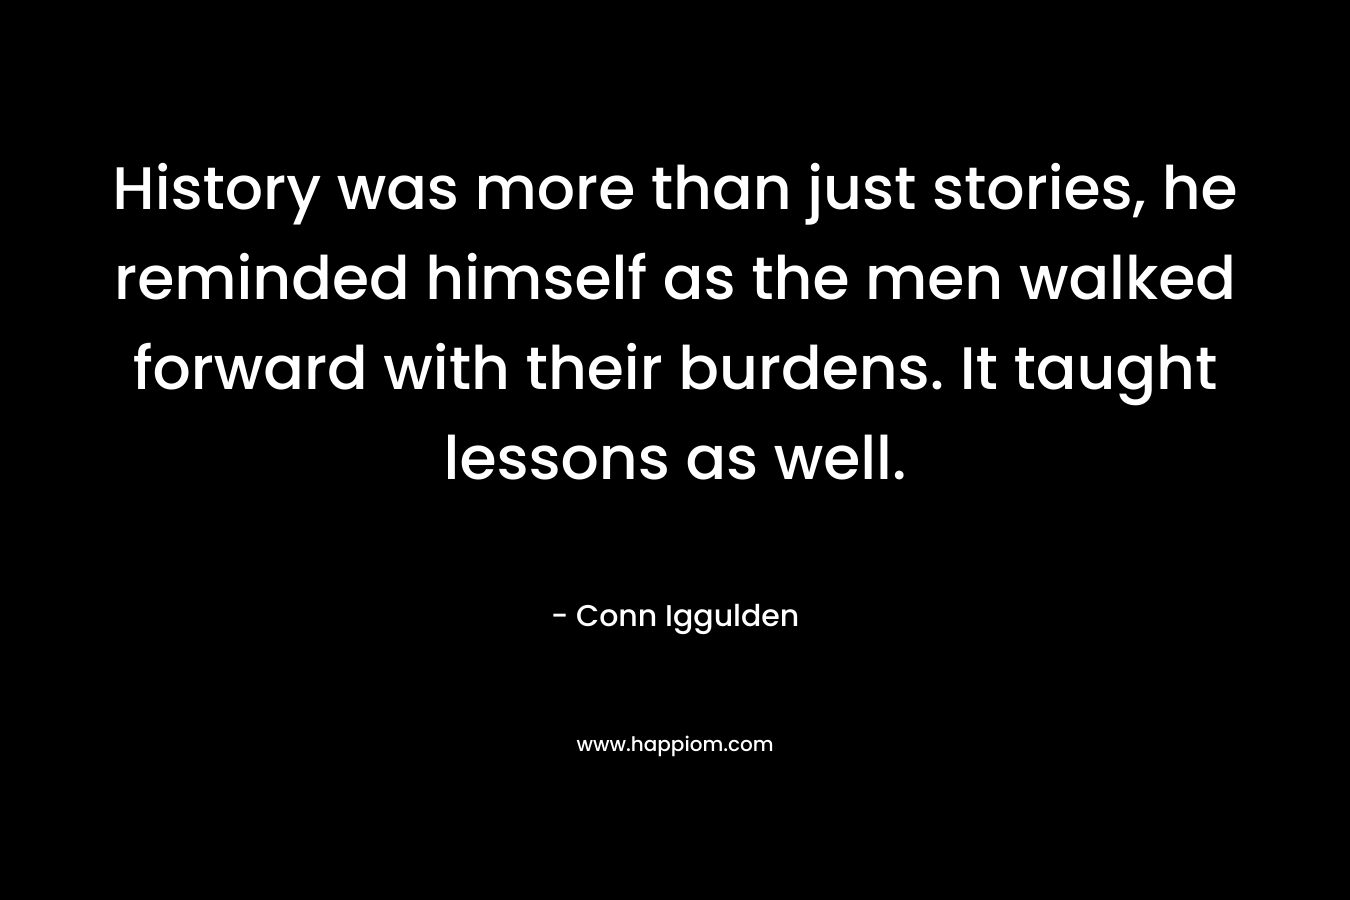 History was more than just stories, he reminded himself as the men walked forward with their burdens. It taught lessons as well.